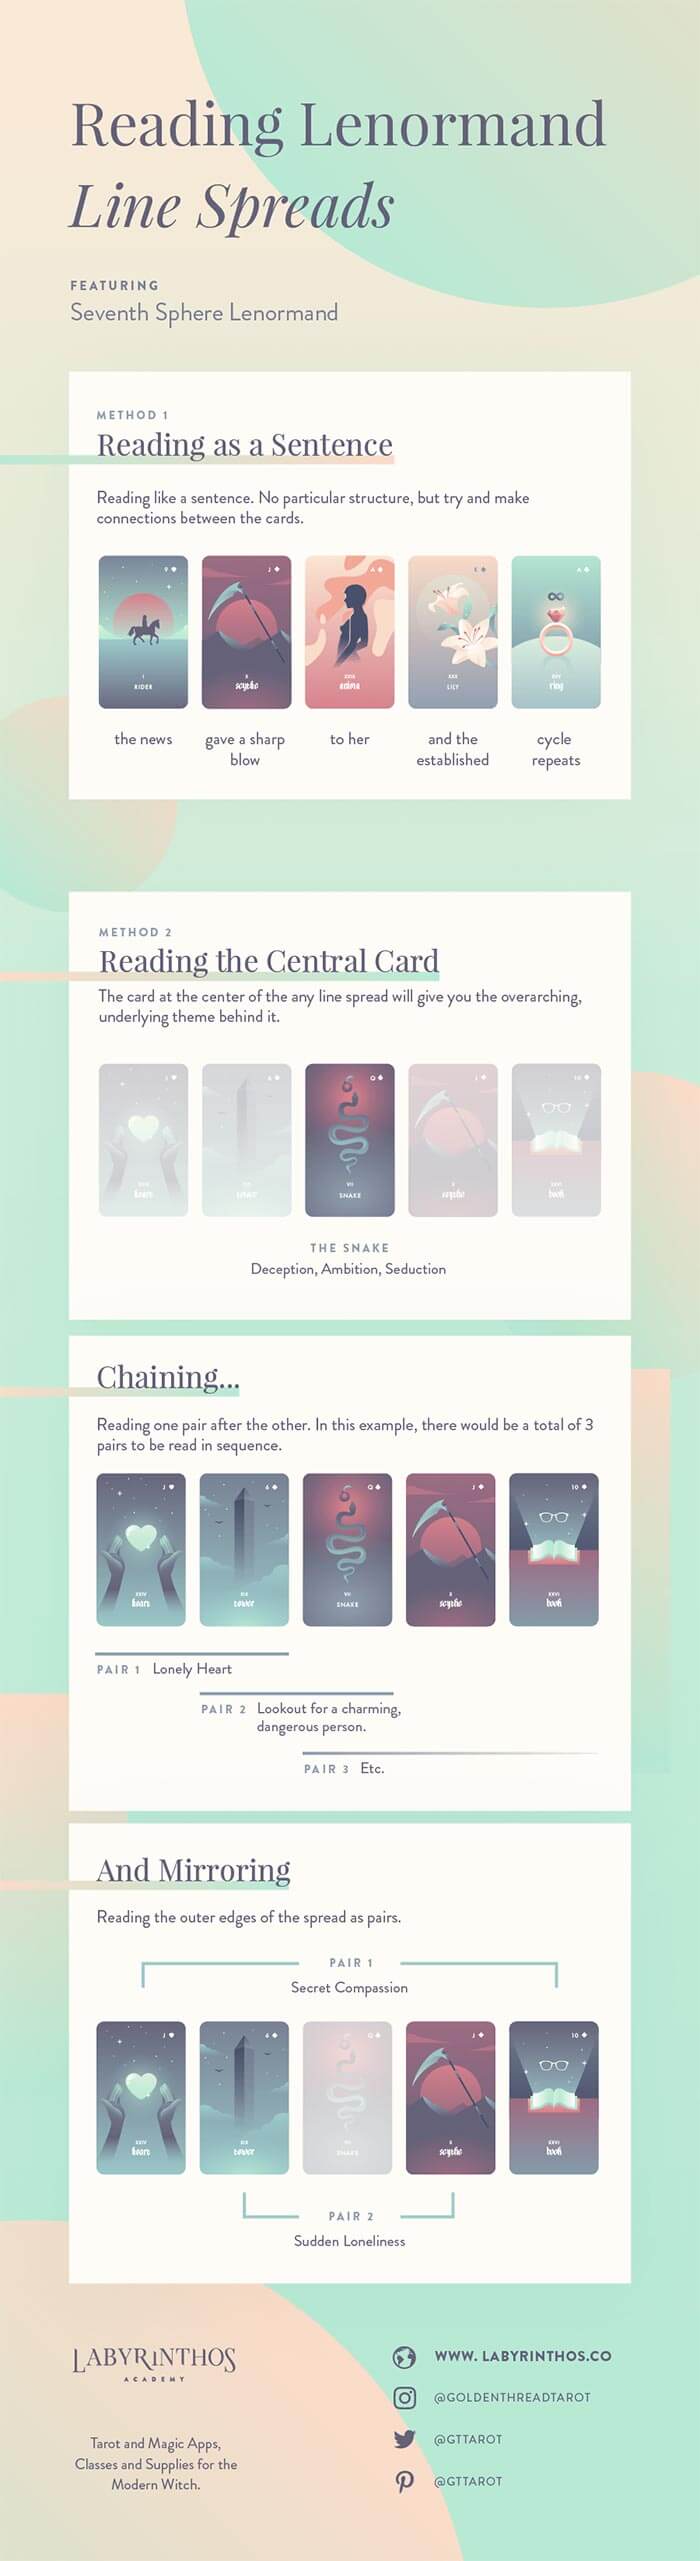 How to Read the Grand Tableau: A 36-Card Lenormand Spread – Labyrinthos